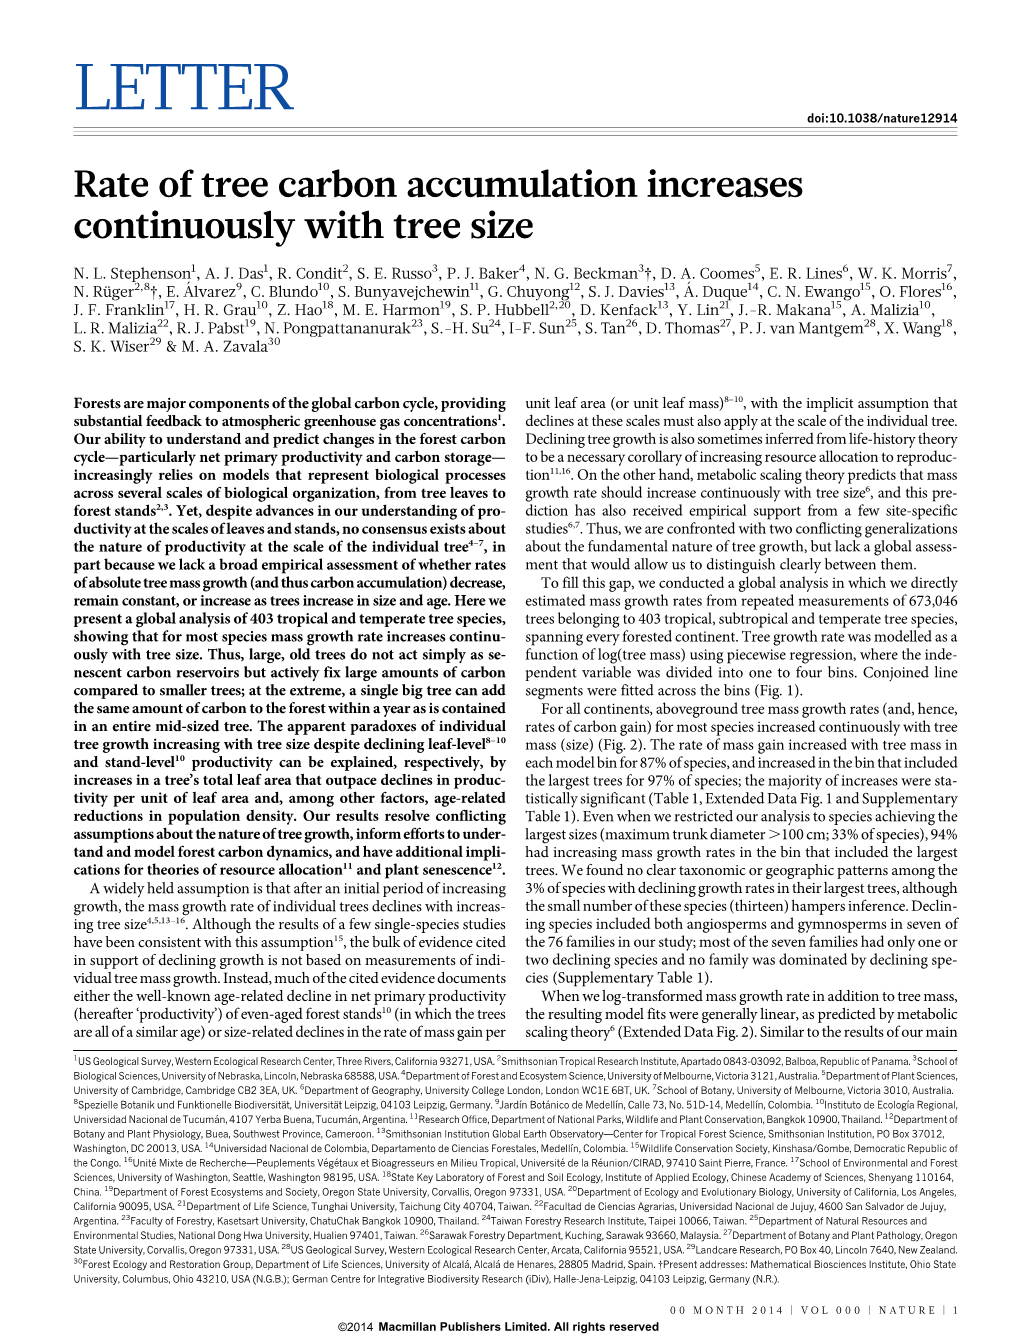 Rate of Tree Carbon Accumulation Increases Continuously with Tree Size